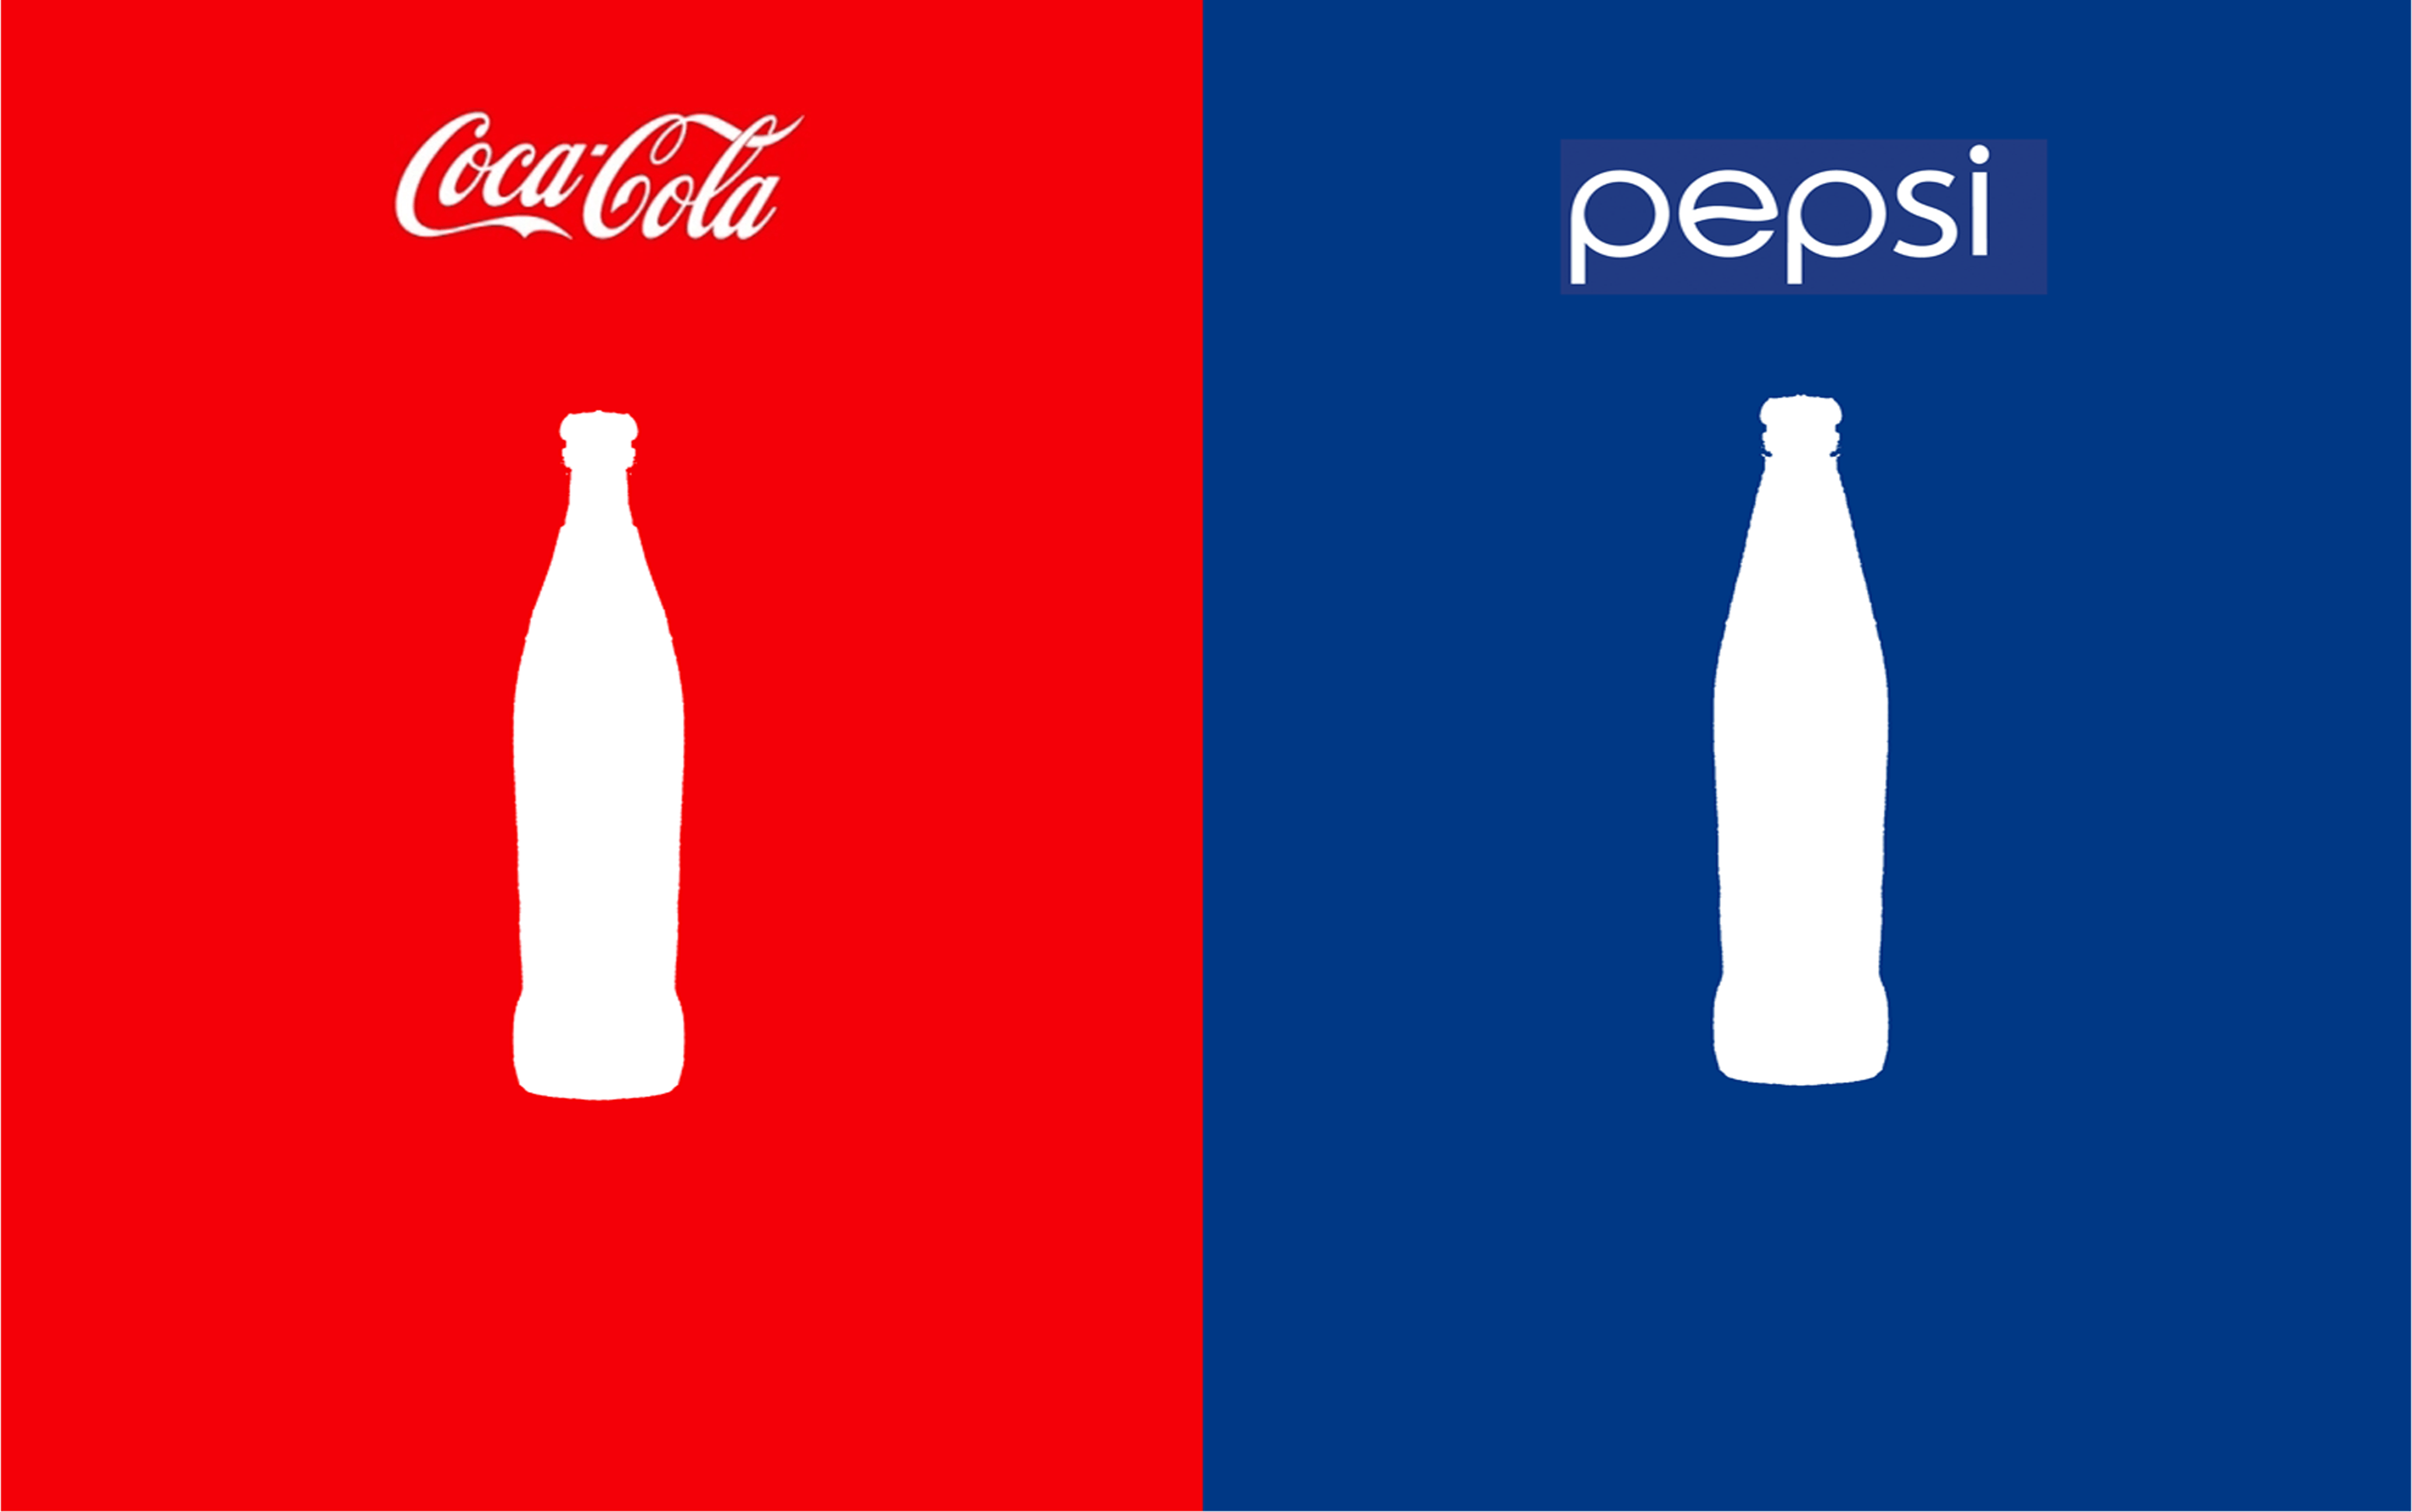 Problems and issues between pepsico and coca cola in latin america